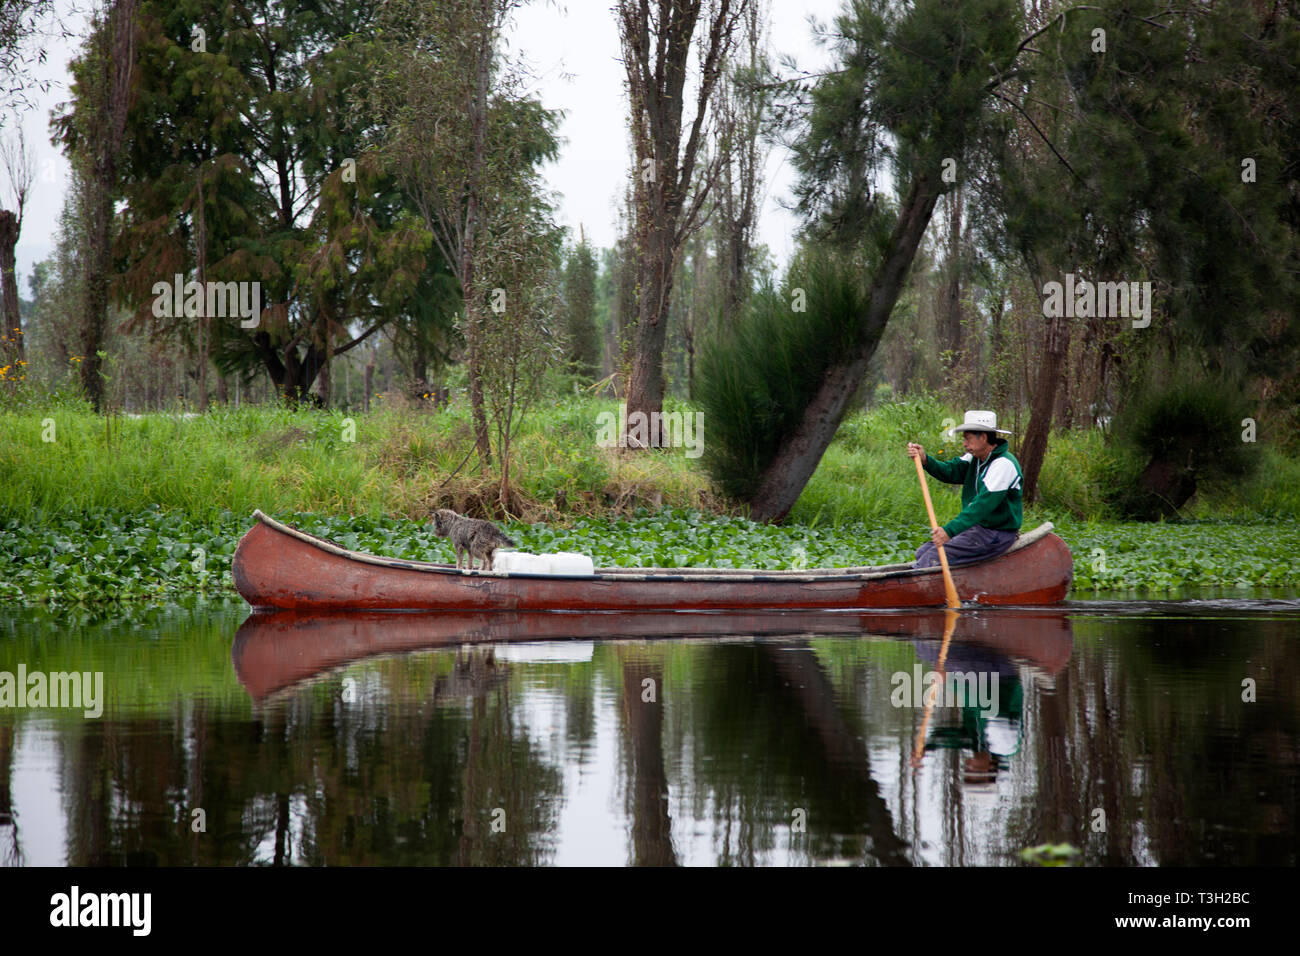 A farmer paddles a canoe in the chinampas of Xochimilco, Pre-hispanic farming system built by the Aztecs, which still exists in Mexico City. Stock Photo